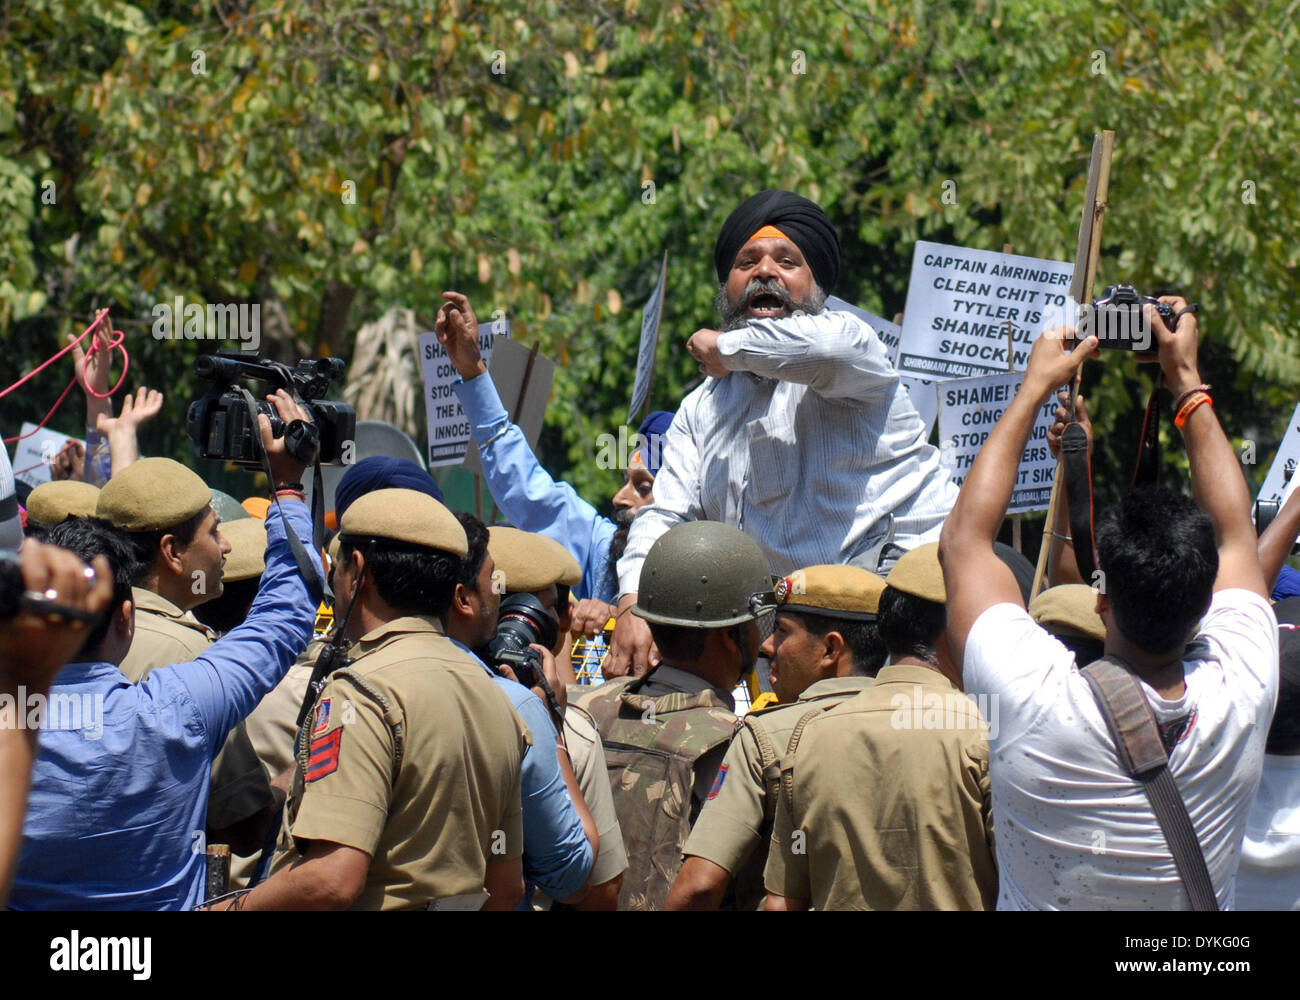 New Delhi, India. 21st April 2014. Indian Sikh protesters shout slogans near a police barricade during a protest against Congress party leader and former chief minister of Punjab state Amarinder Singh for his recent remarks on the country's 1984 anti-Sikh riots in New Delhi, India, April 21, 2014. Singh in a recent television interview said party leader Jagdish Tytler, one of the accused, had no role in the 1984 riots that killed more than 3,000 Sikhs. Credit:  Xinhua/Alamy Live News Stock Photo